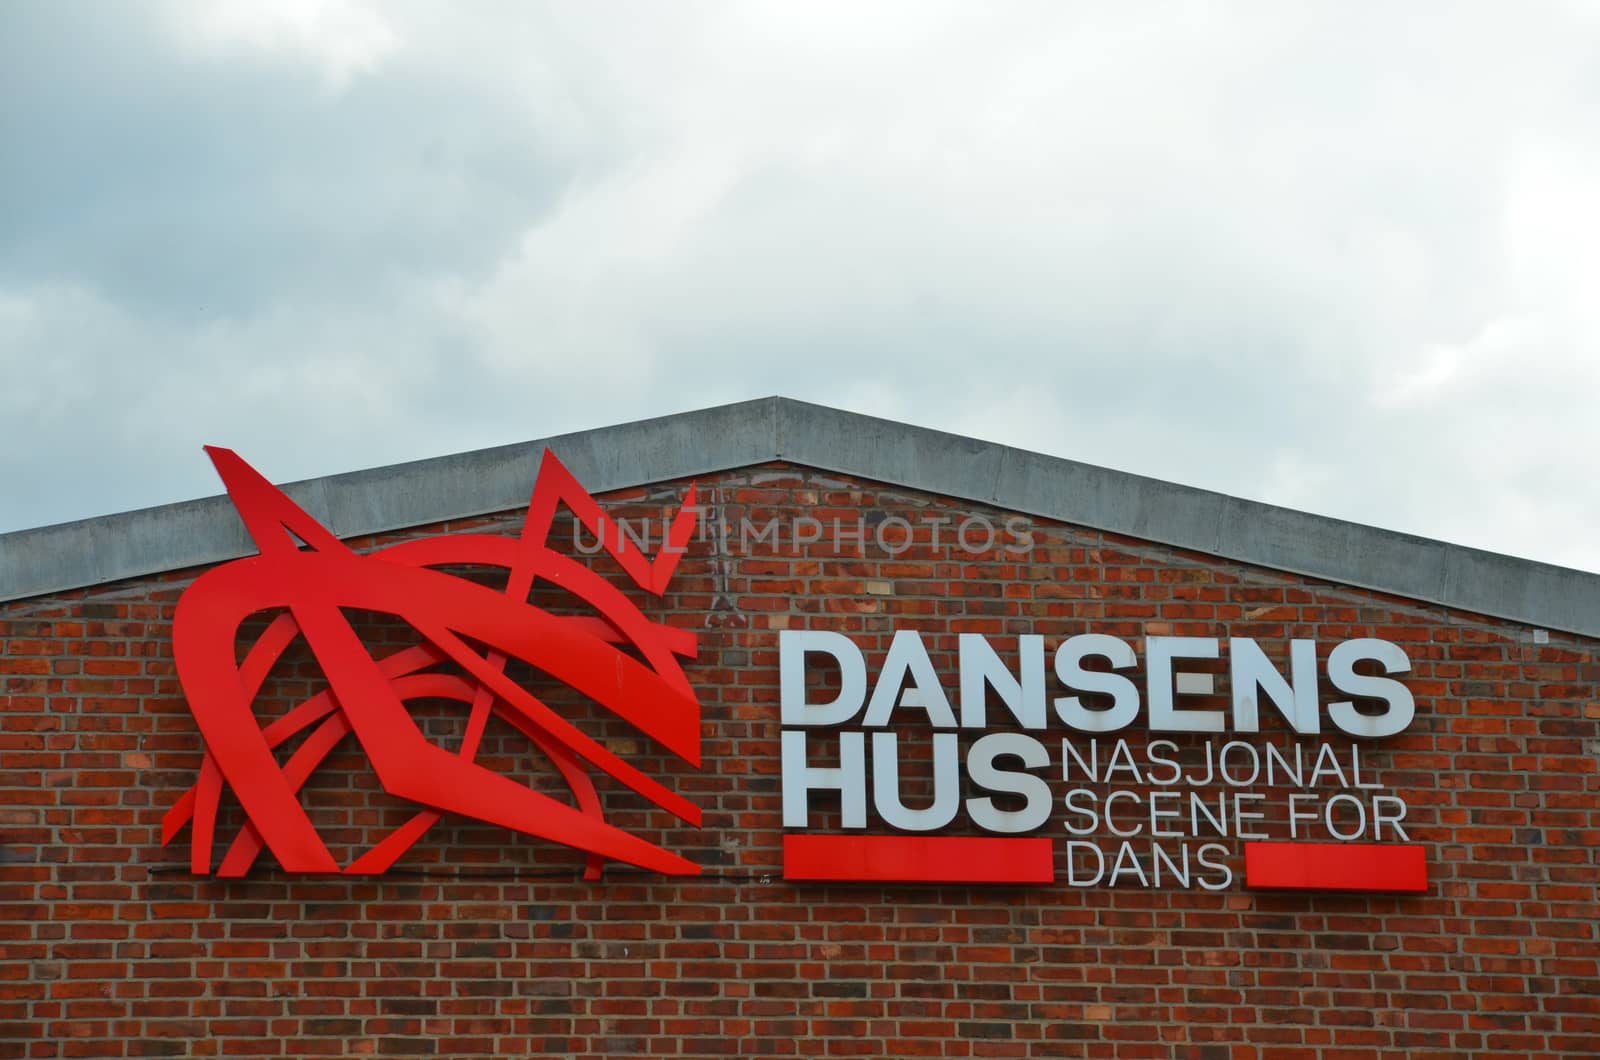 The House of Dance (Norwegian: Dansens hus) was established in 2004. The venue has since presented over 200 works for almost 70 000 spectators. It is located at the cultural quarter Vulkan at Grünerløkka in Oslo.